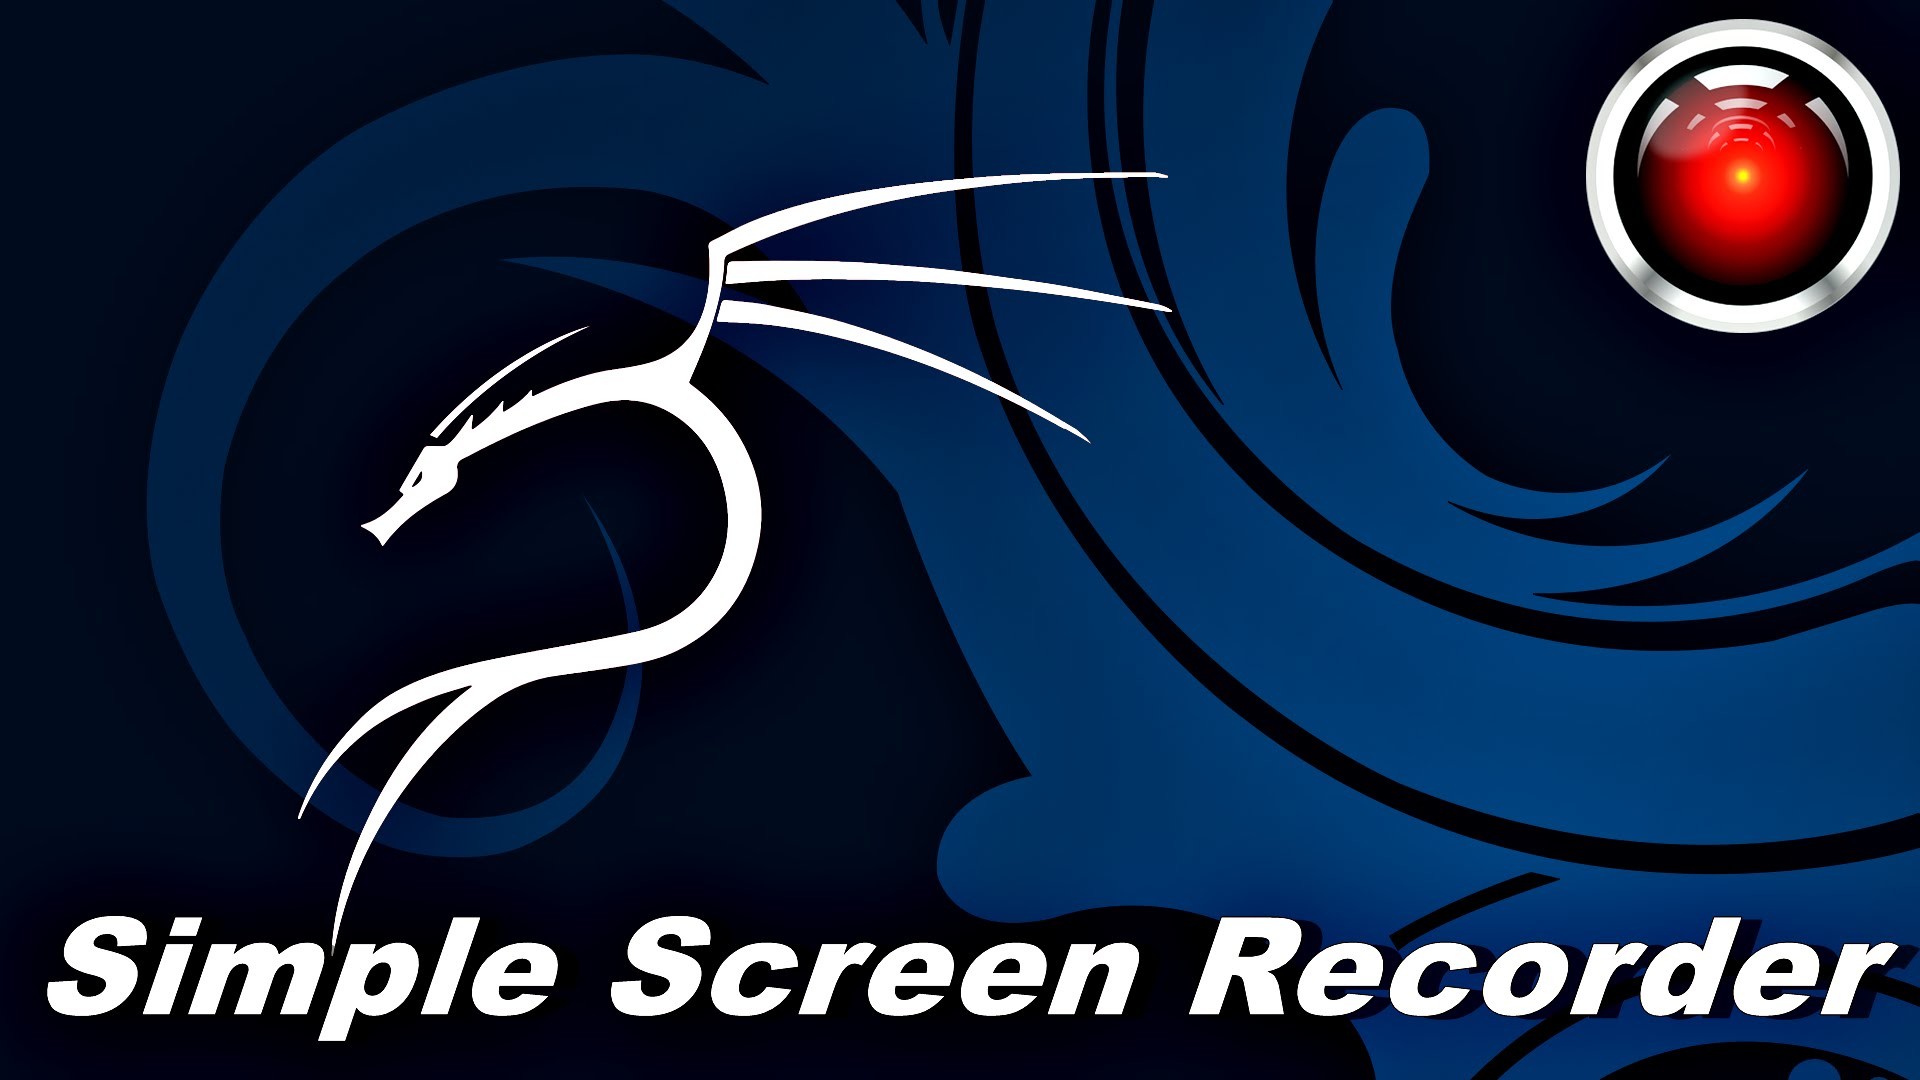 1920x1080 How to Record mp4 on kali Linux 2.0 with Simple Screen Recorder